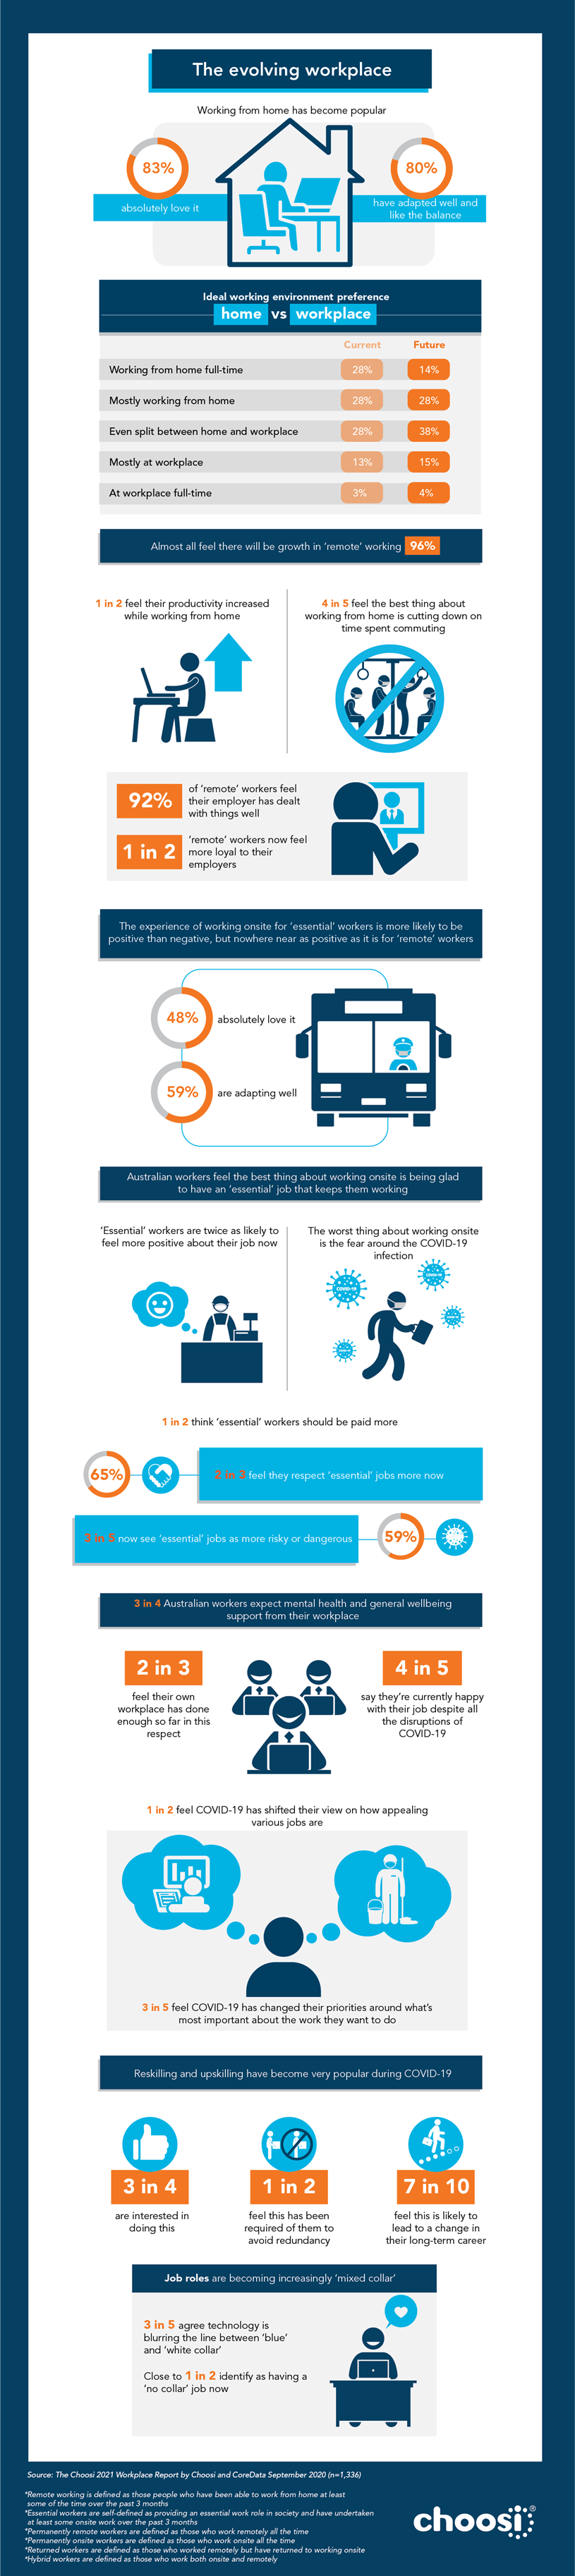 An infographic of the Evolving Workplace 